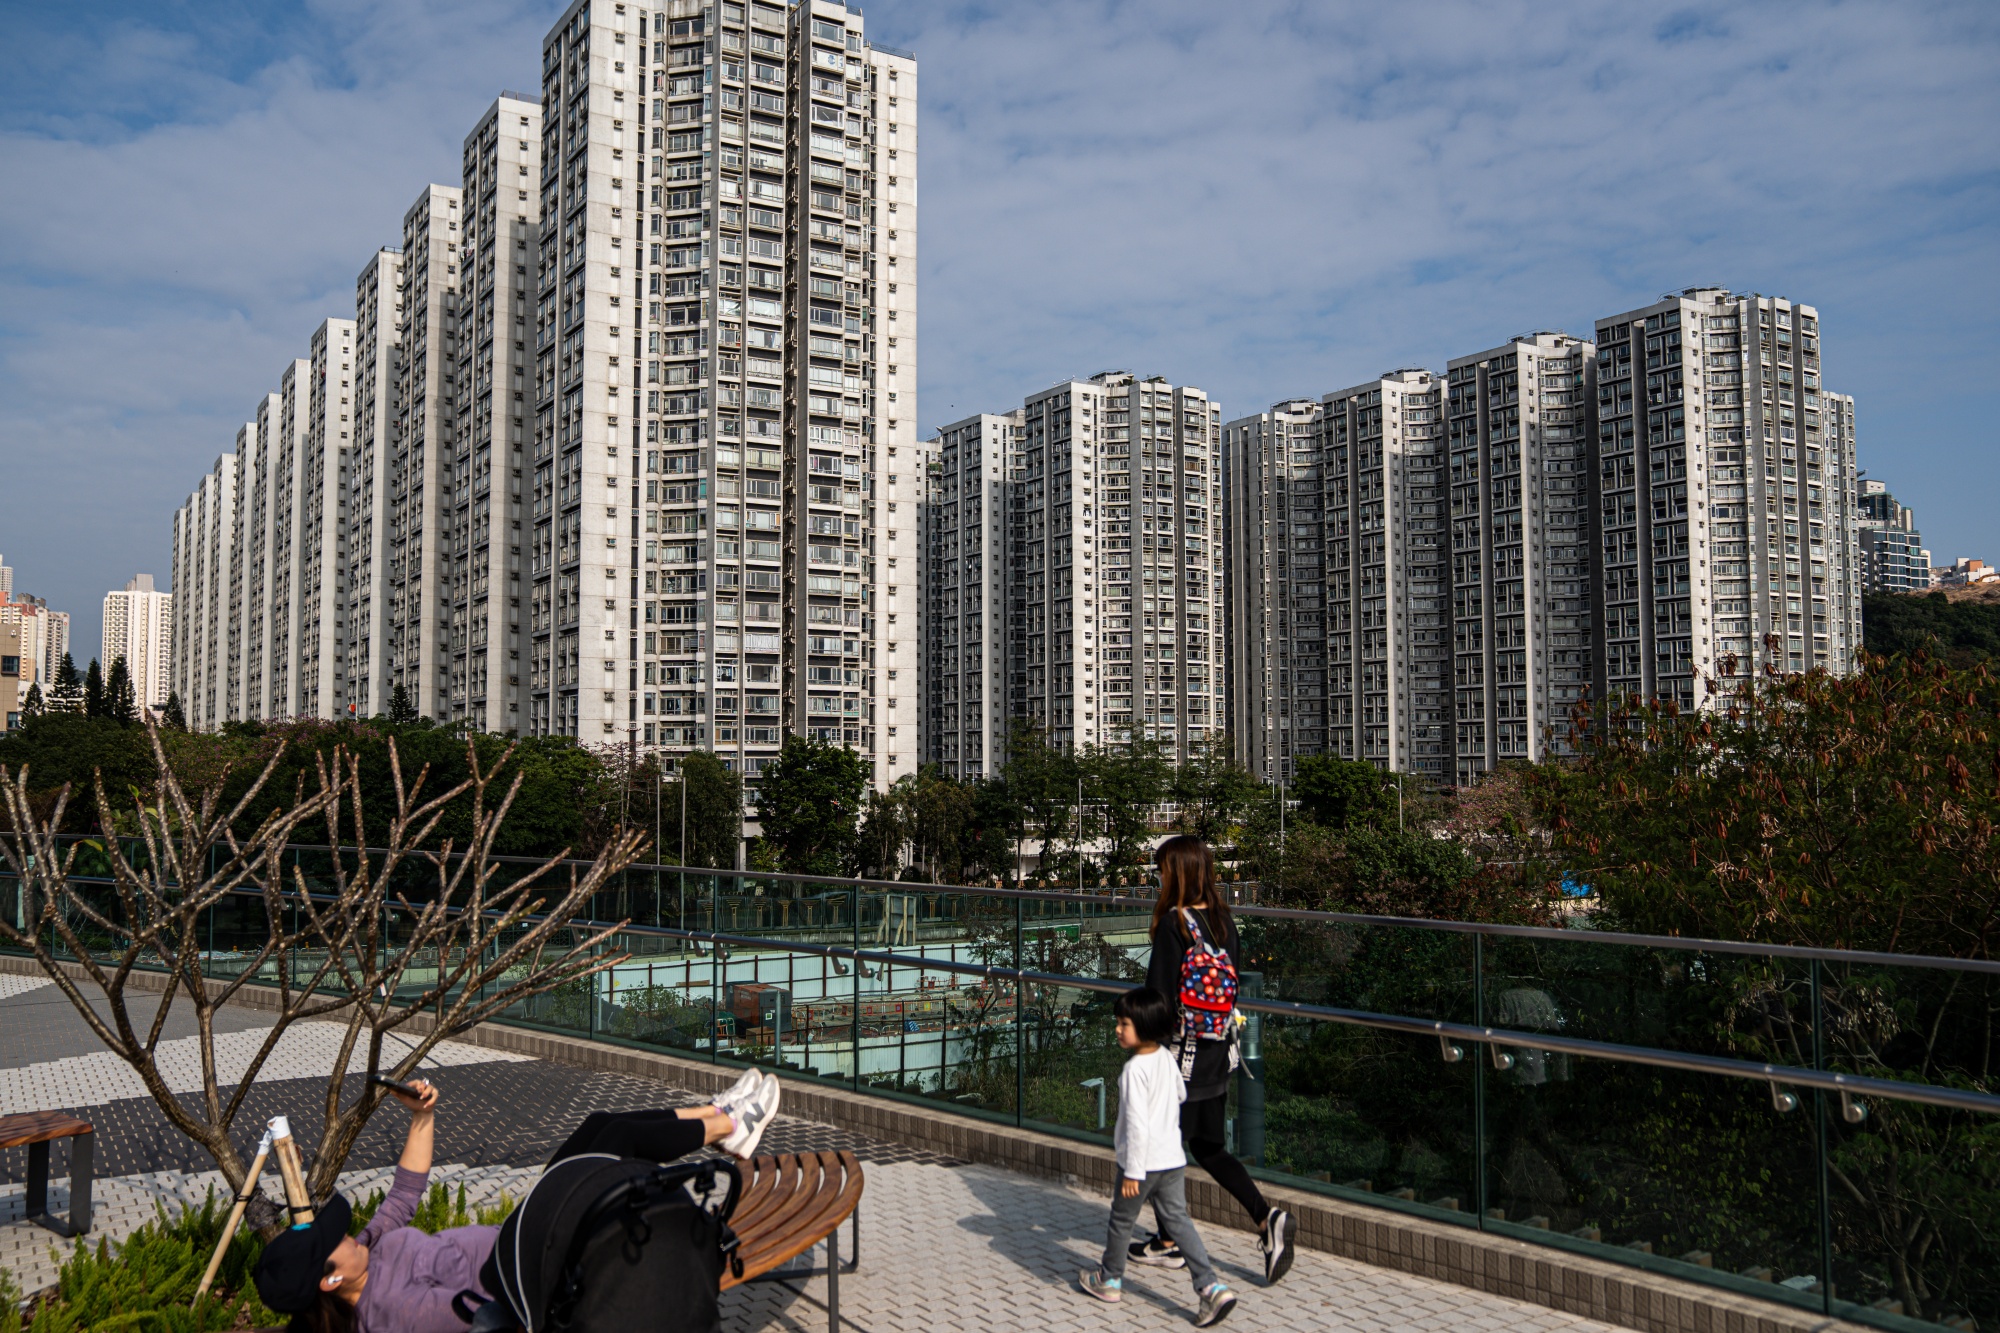 Hong Kong Budget Expected to Ease Property Curbs, Boost Tourism to